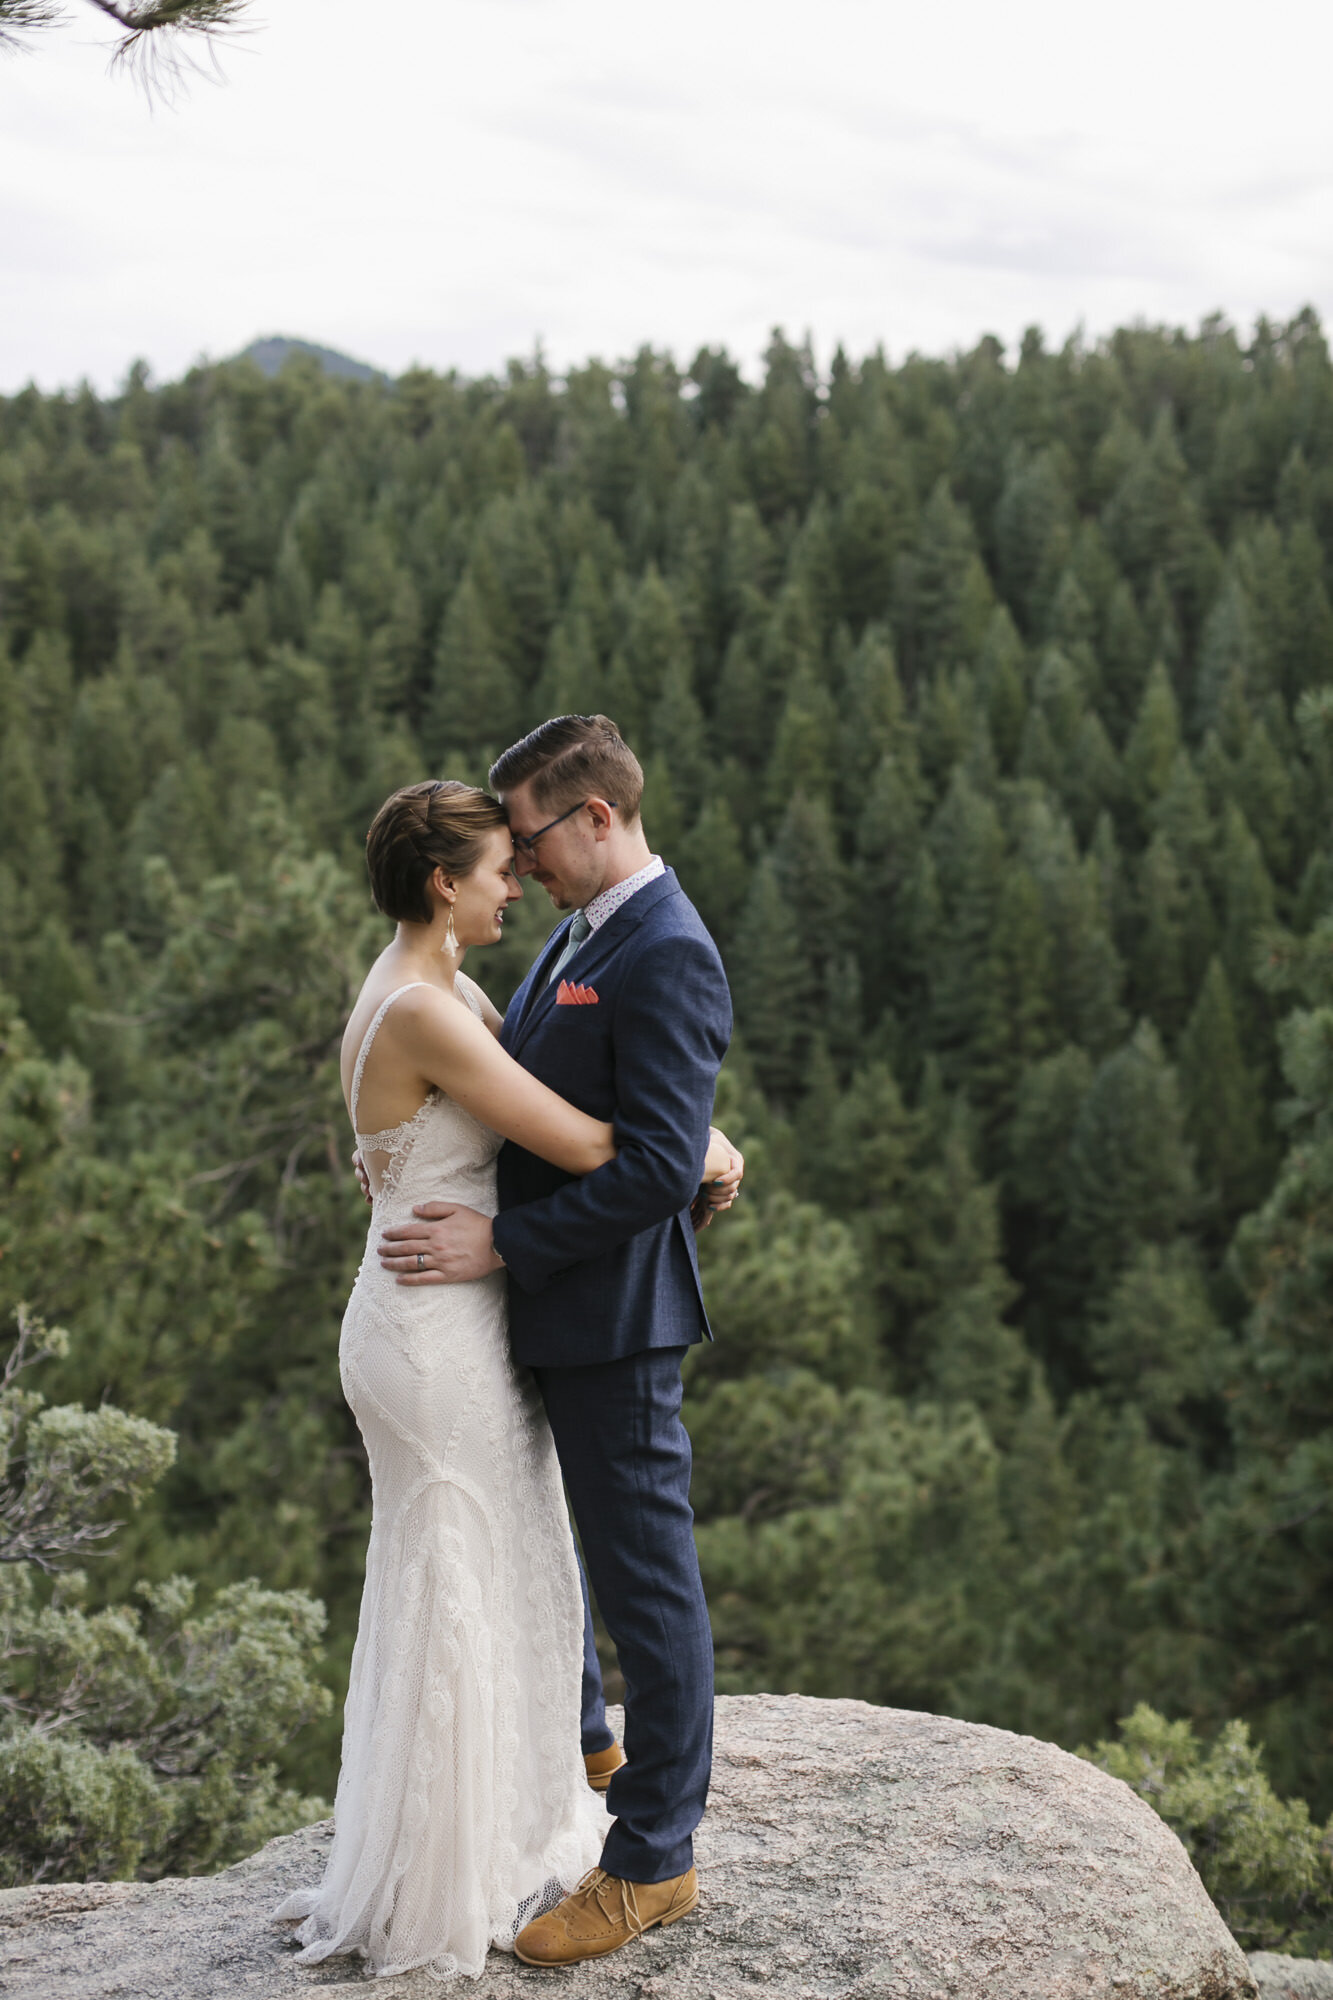 Wedding couple stand on rock outcropping with forest of trees behind them in Colorado